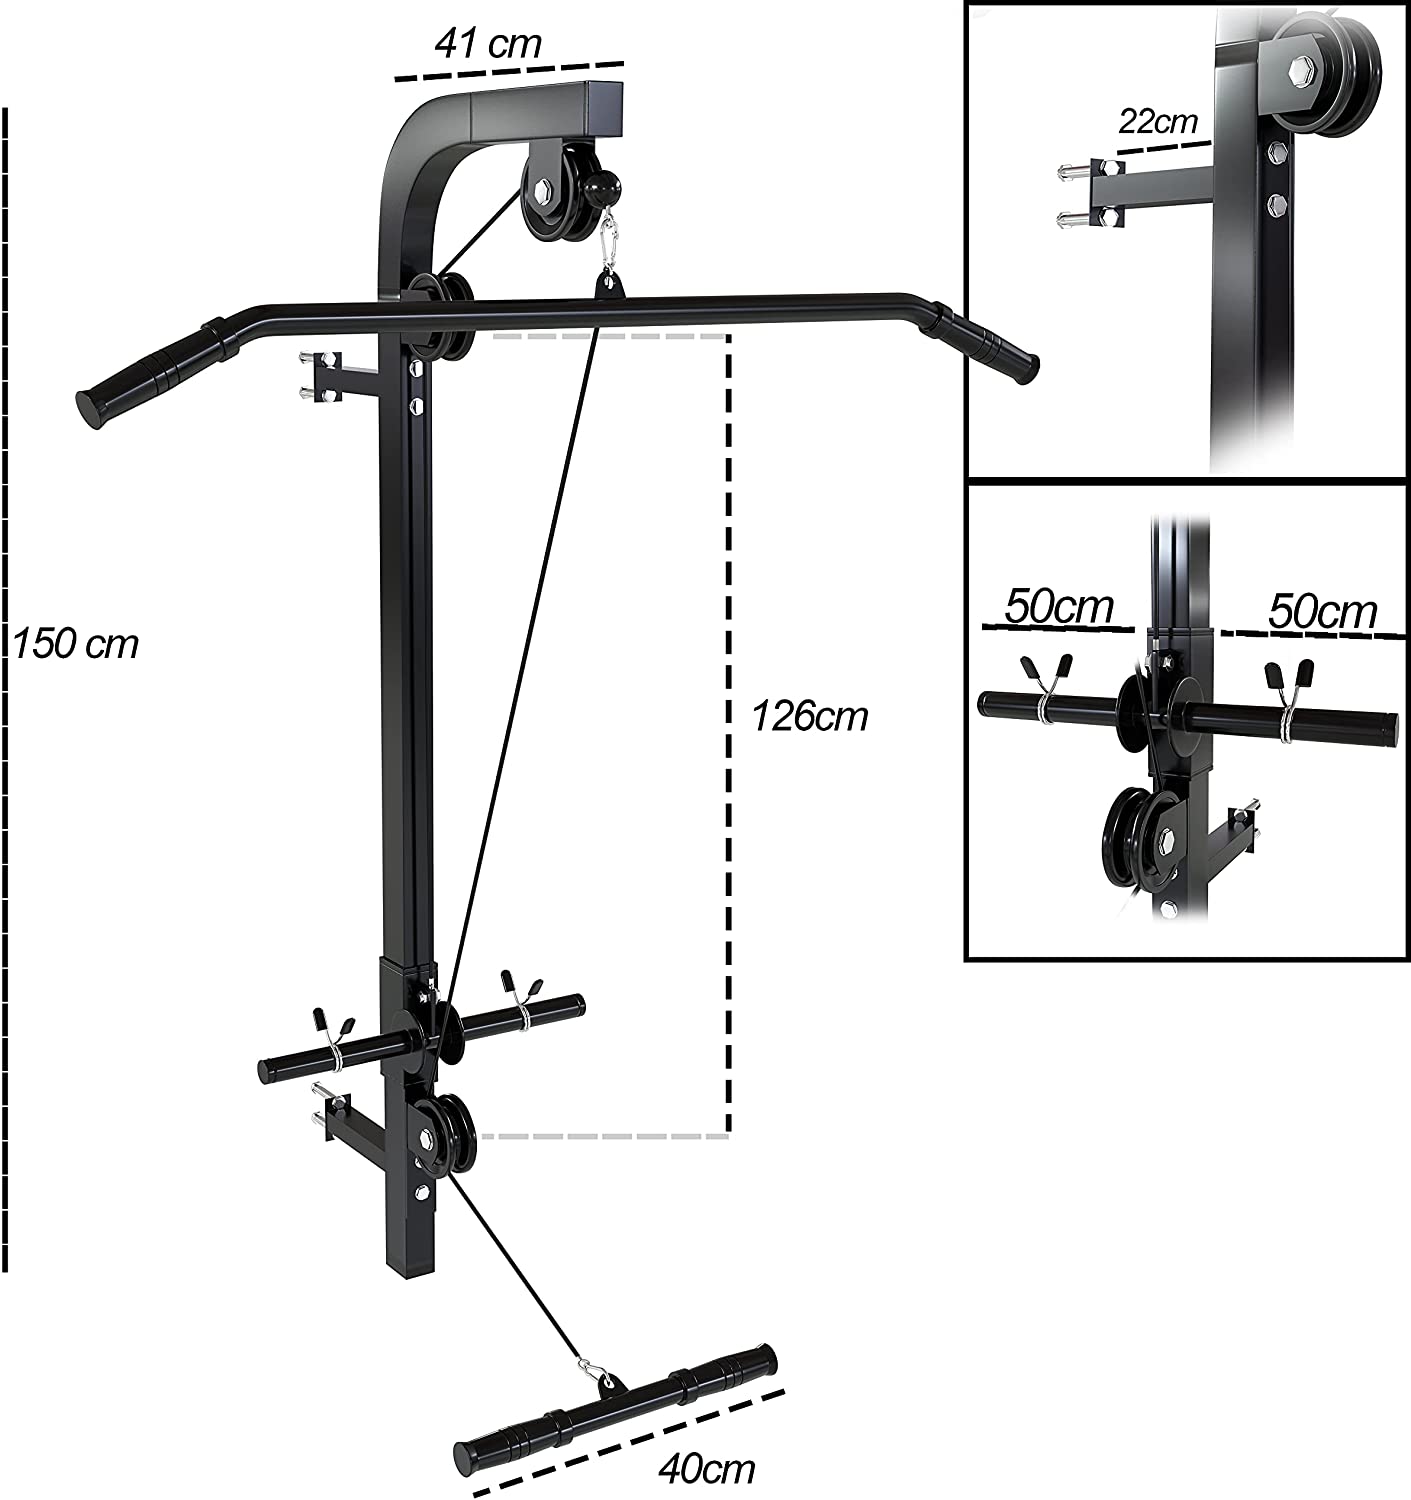 Wall Mounted Cable Machine Multi Gym - Fits Standard 1 